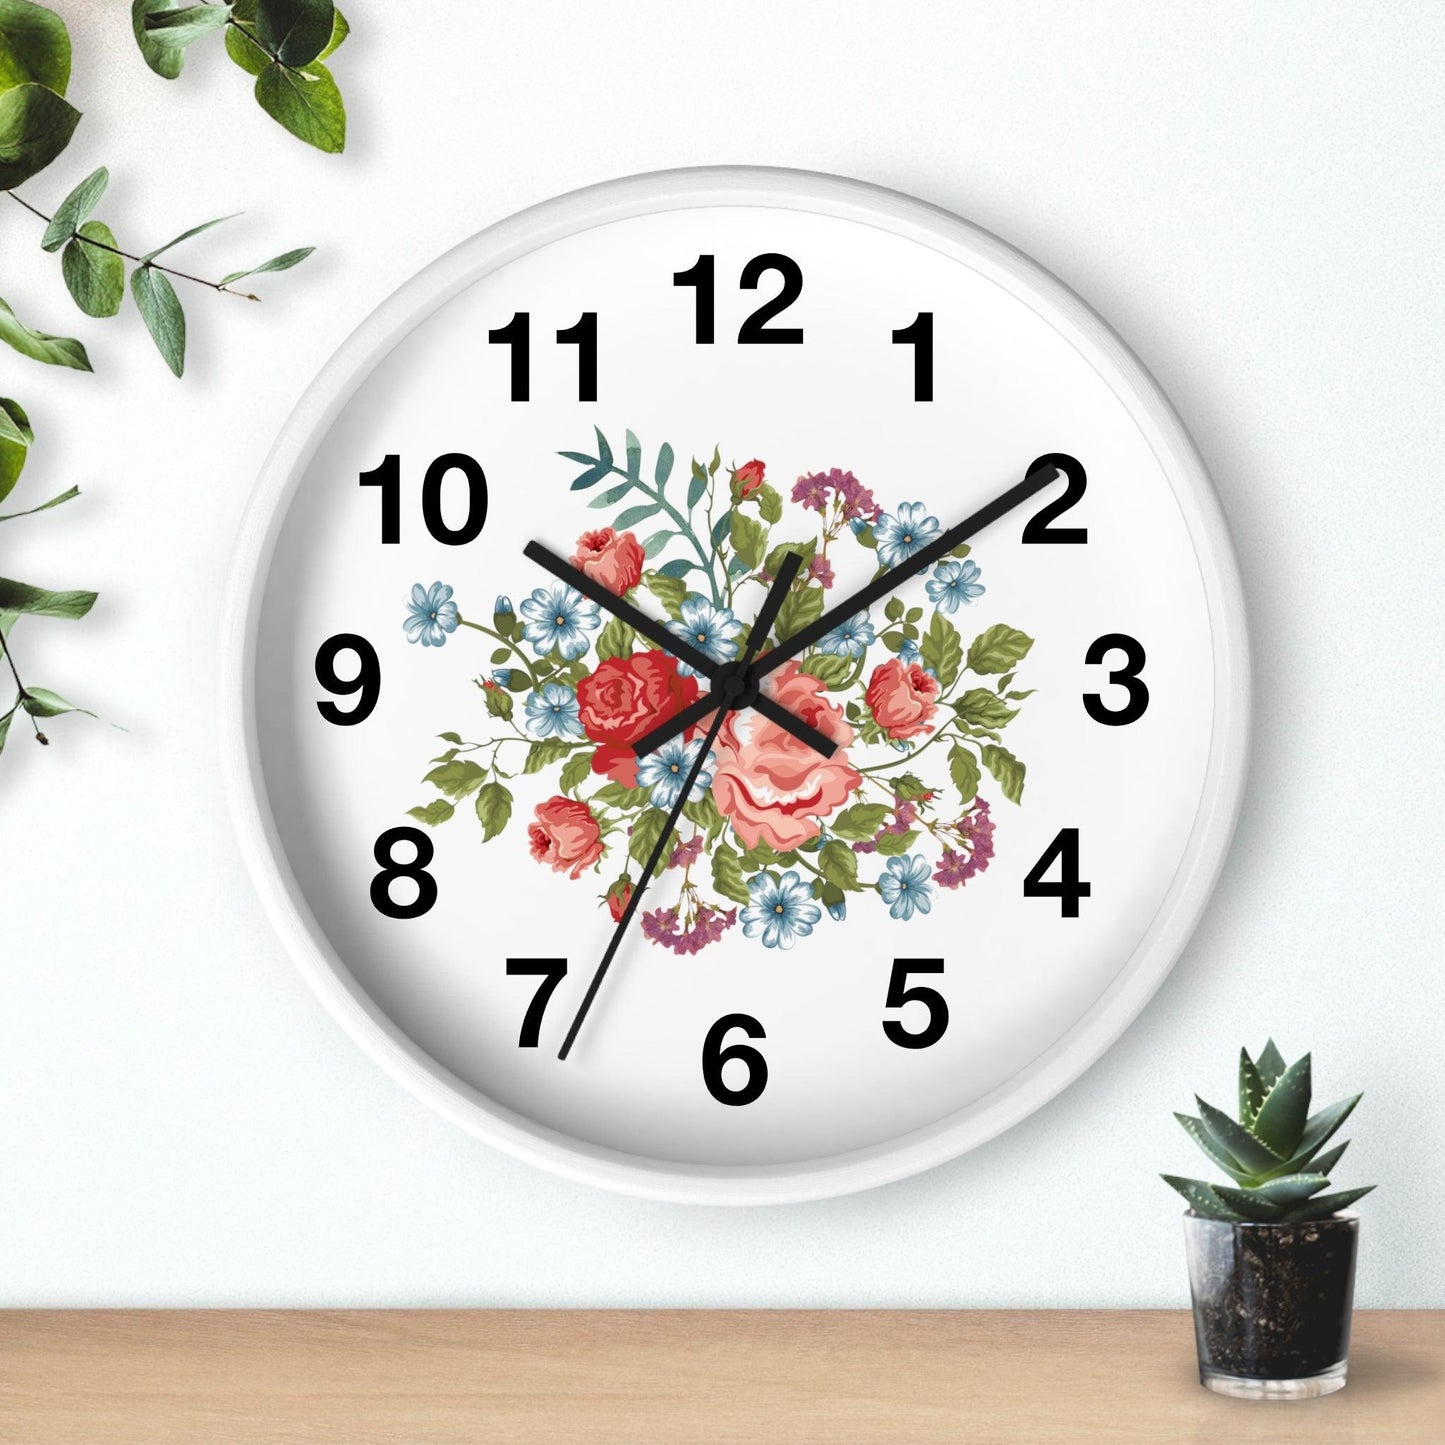 Flower Wall Clock Floral Wall Clock Home Decor Gift House Warming Gift- New Home Gift Mom Gift Farmhouse Clocks For Wall Living Room Bedroom